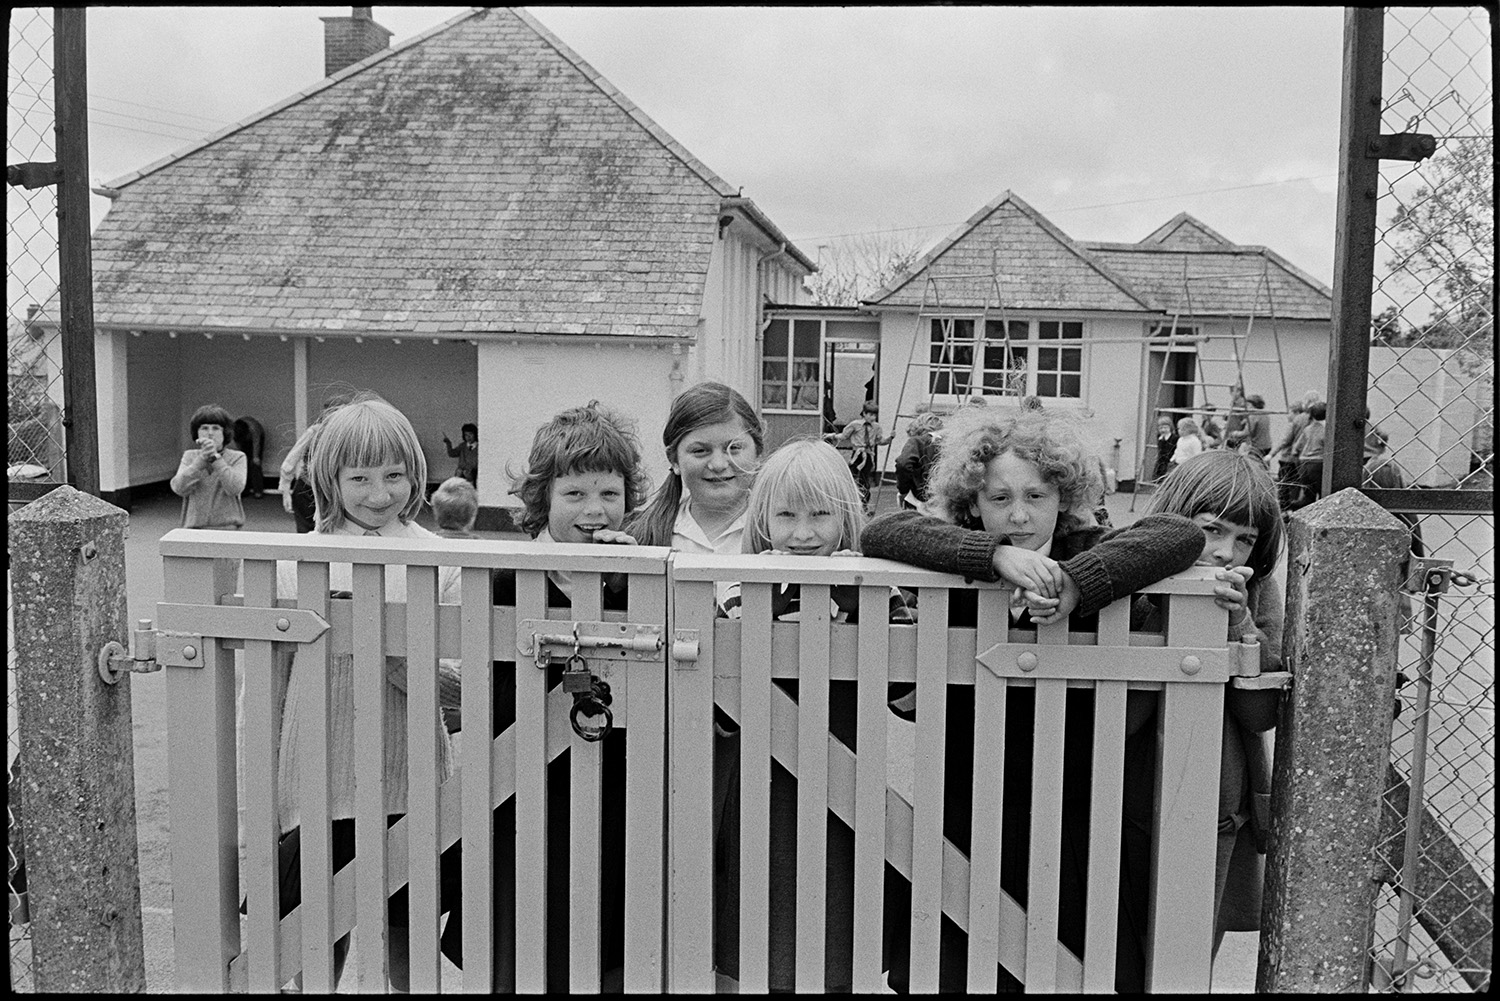 In and out of school with children playing. 
[Schoolchildren looking over the school gate at Kings Nympton Primary School. Children can be seen playing on a climbing frame in the playground in the background.]